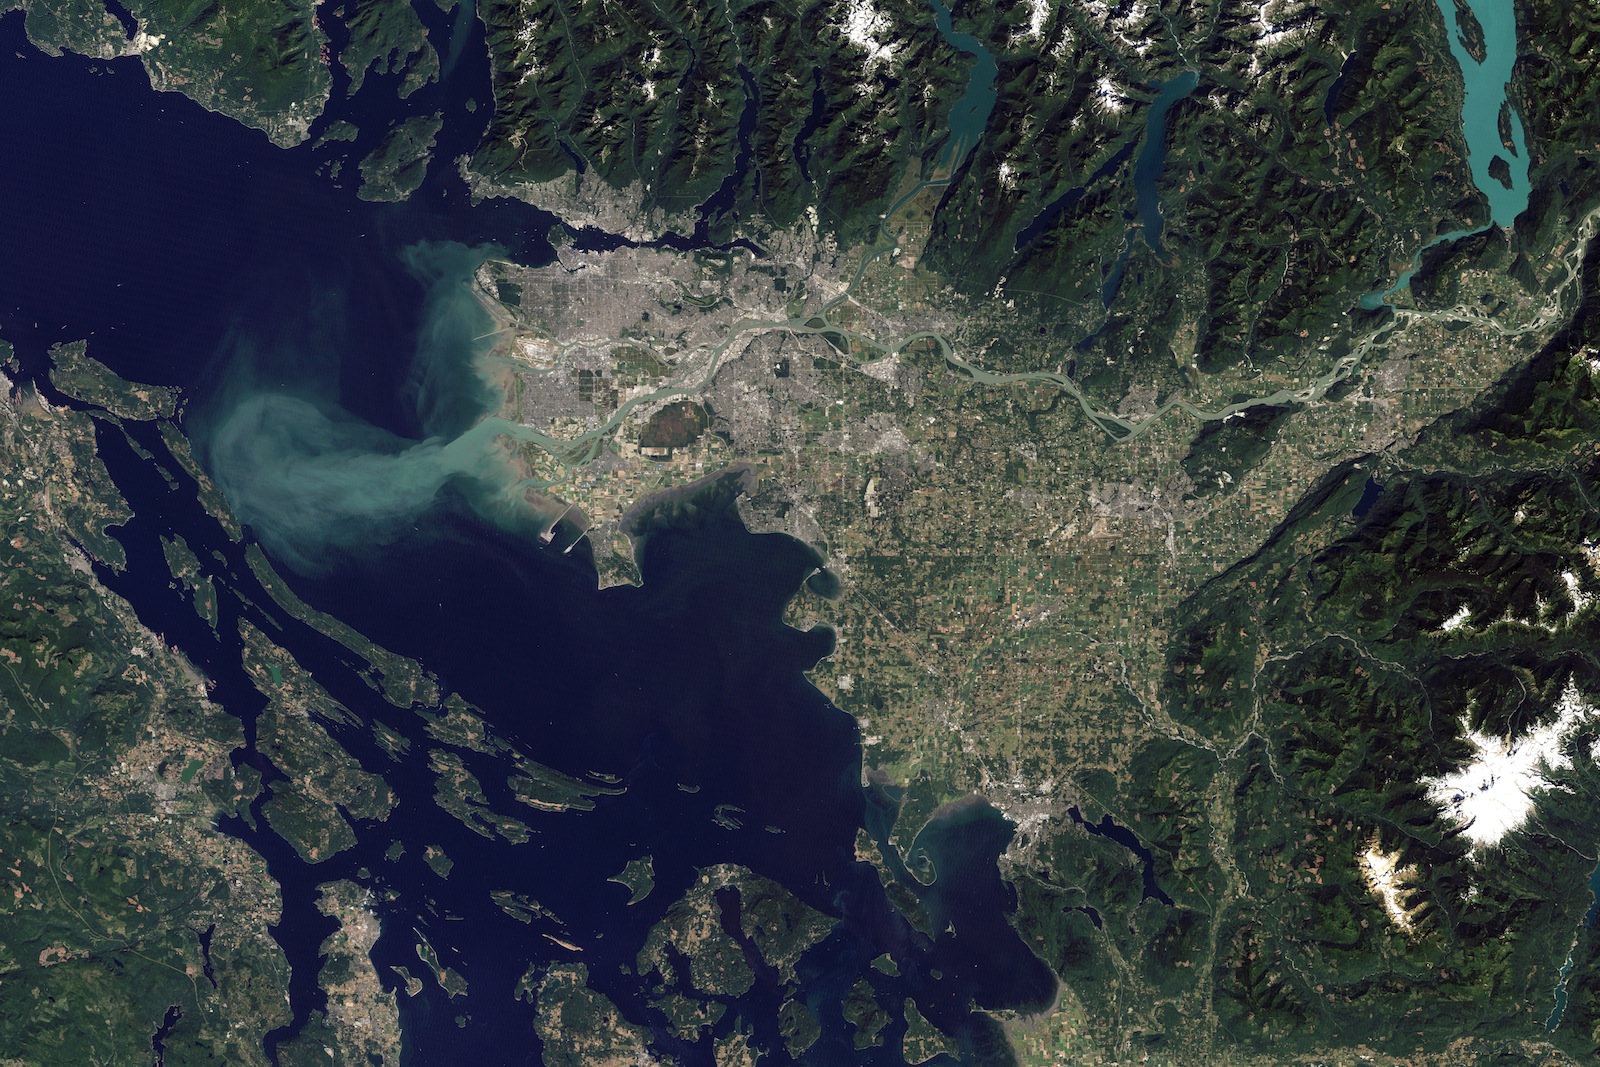 Fraser River seen from space